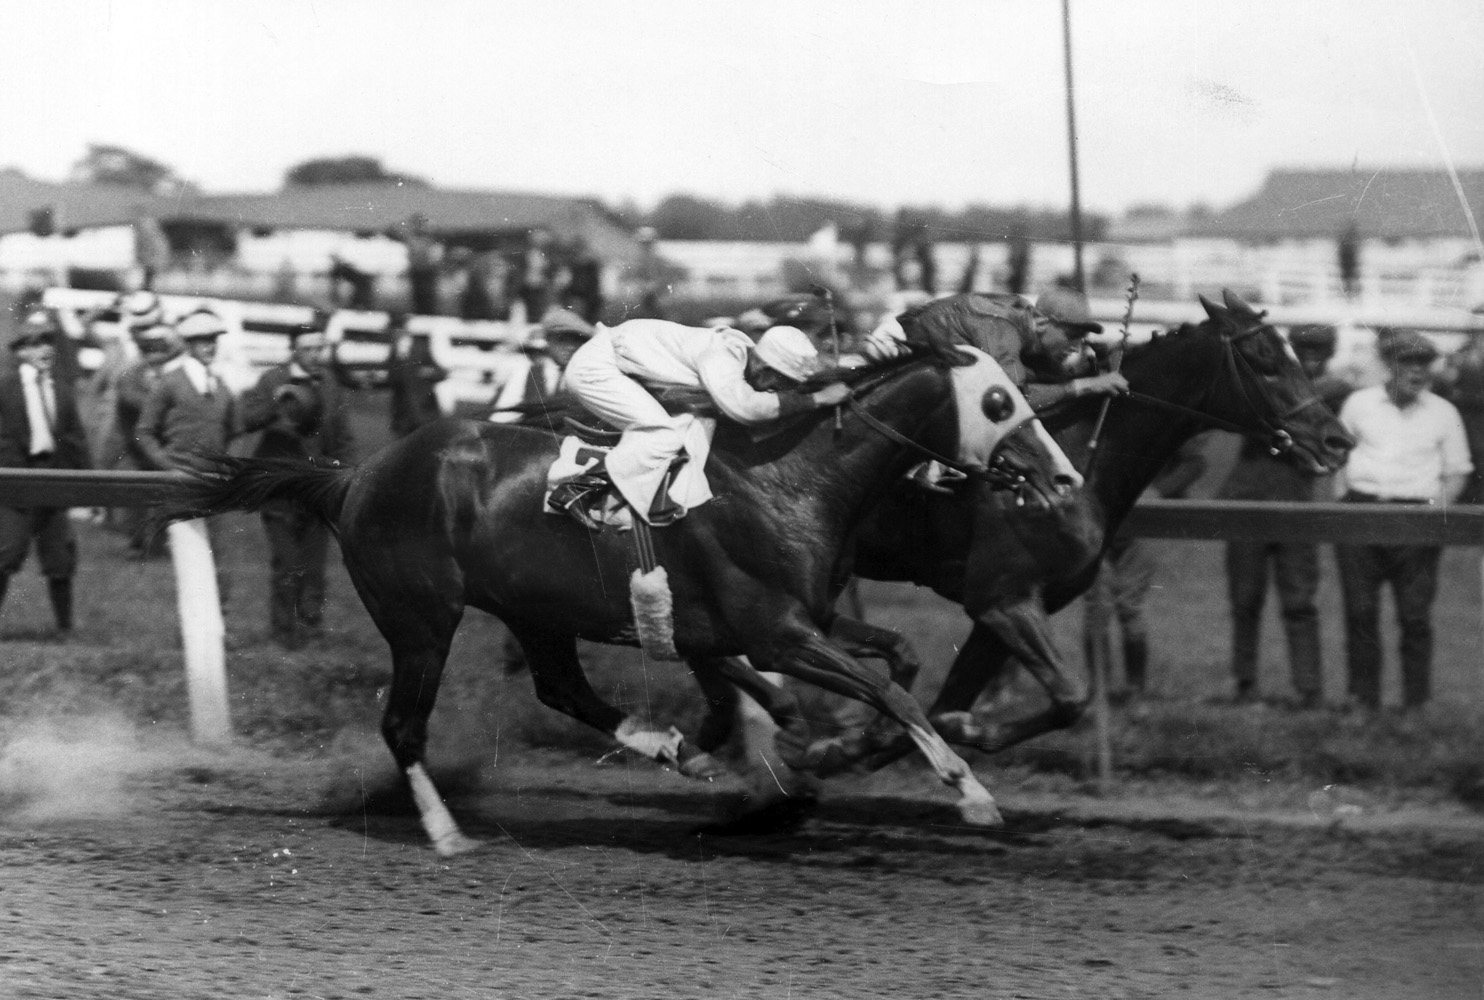 Exterminator (Albert Johnson up) defeating fellow Hall of Famer Grey Lag in the 1922 Brooklyn Handicap at Aqueduct (Museum Collection)